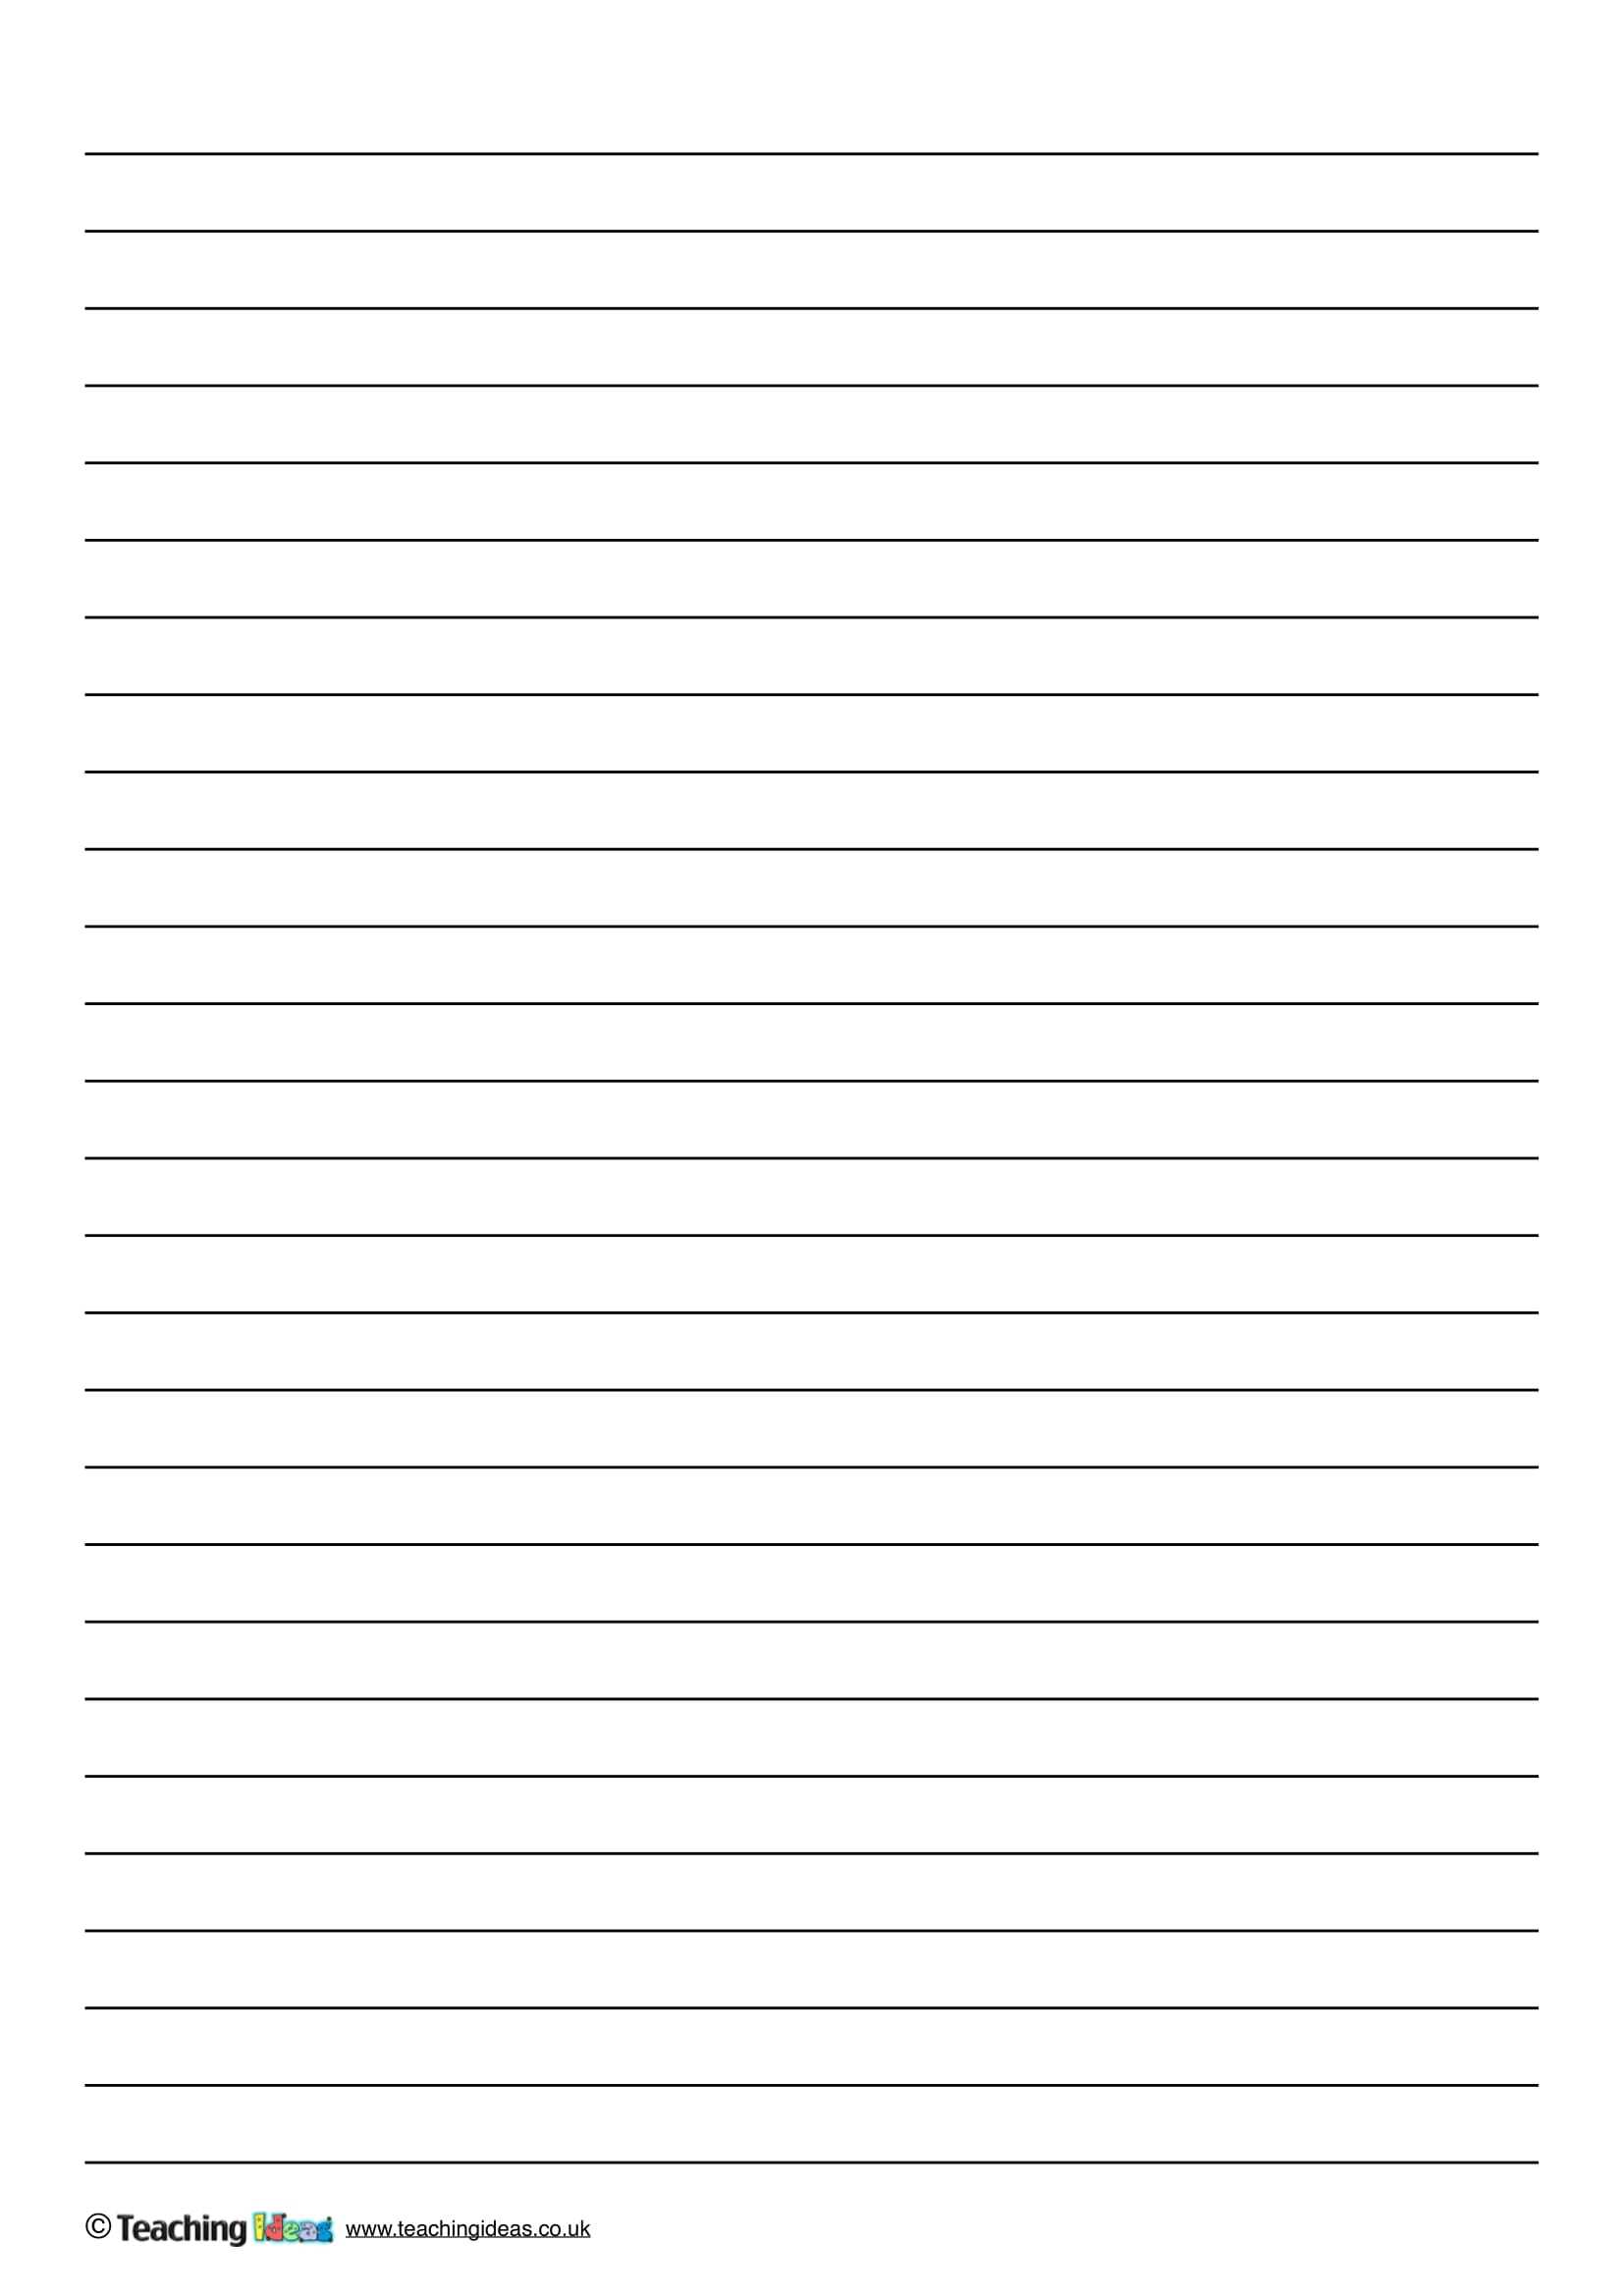 11+ Lined Paper Templates - Pdf | Free & Premium Templates Regarding Ruled Paper Template Word